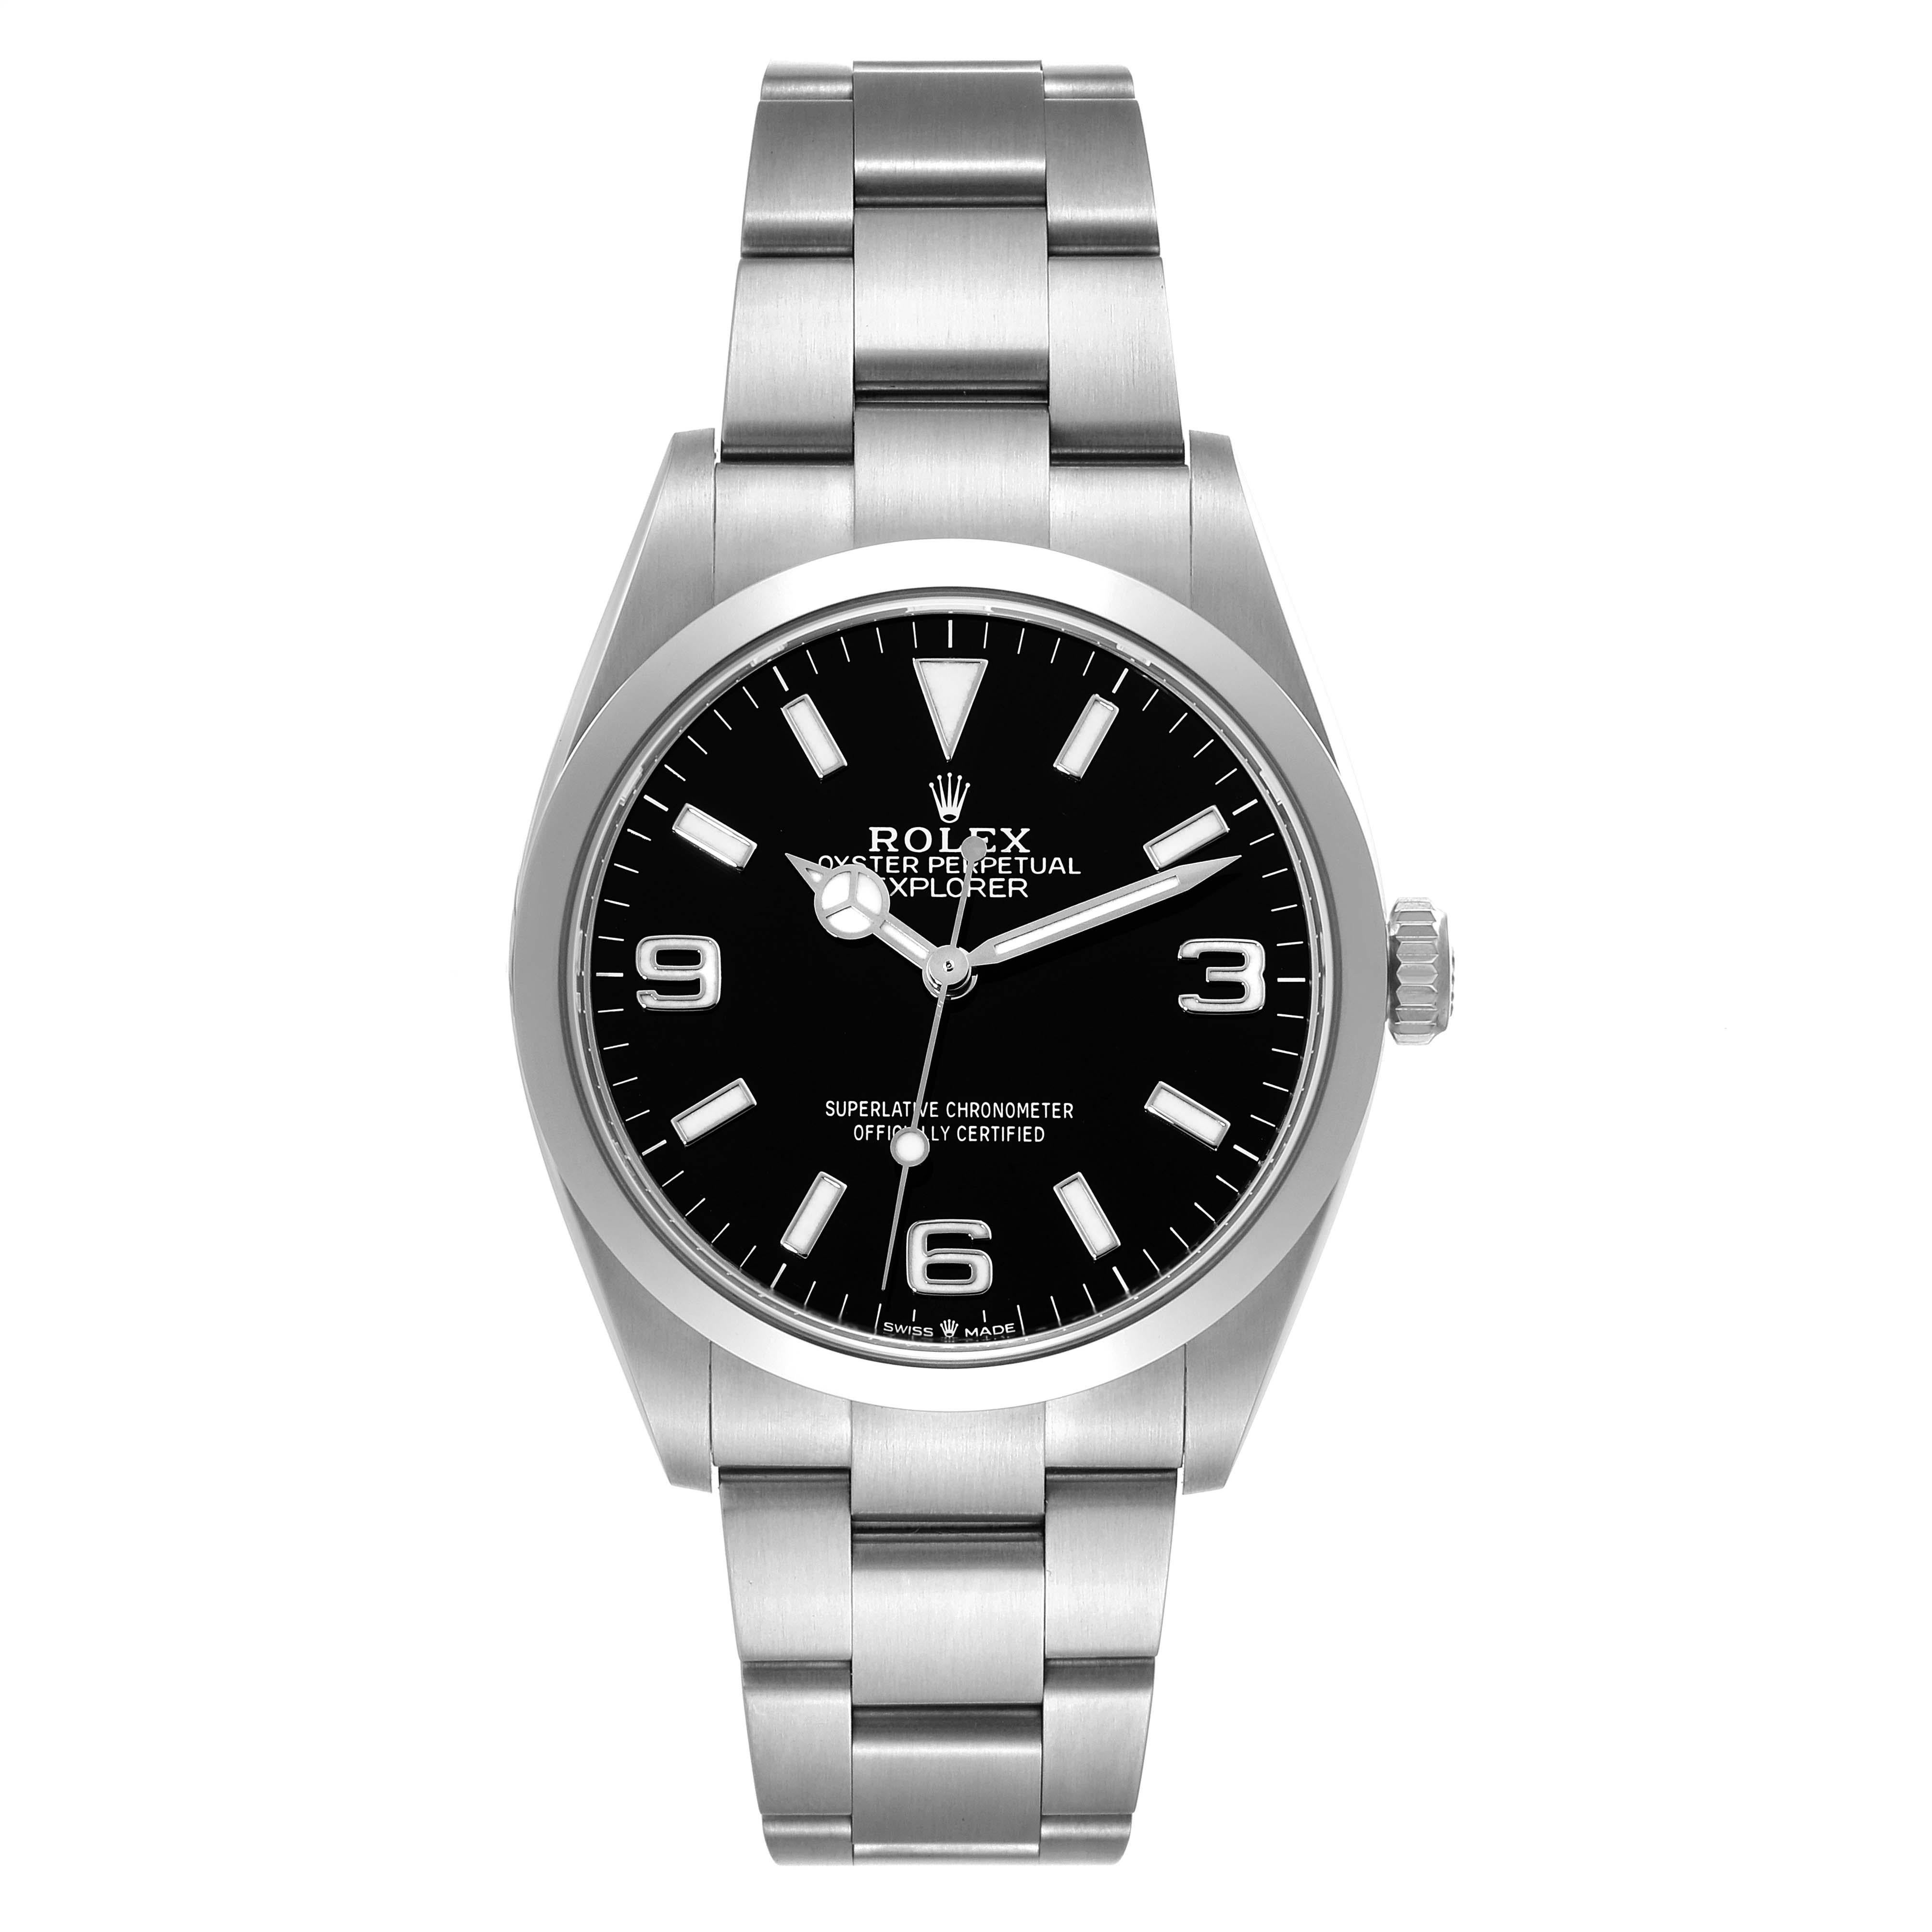 Rolex Explorer I 36mm Black Dial Steel Mens Watch 124270 Box Card. Officially certified chronometer automatic self-winding movement. Stainless steel case 36.0 mm in diameter. Rolex logo on the crown. Stainless steel smooth bezel. Scratch resistant